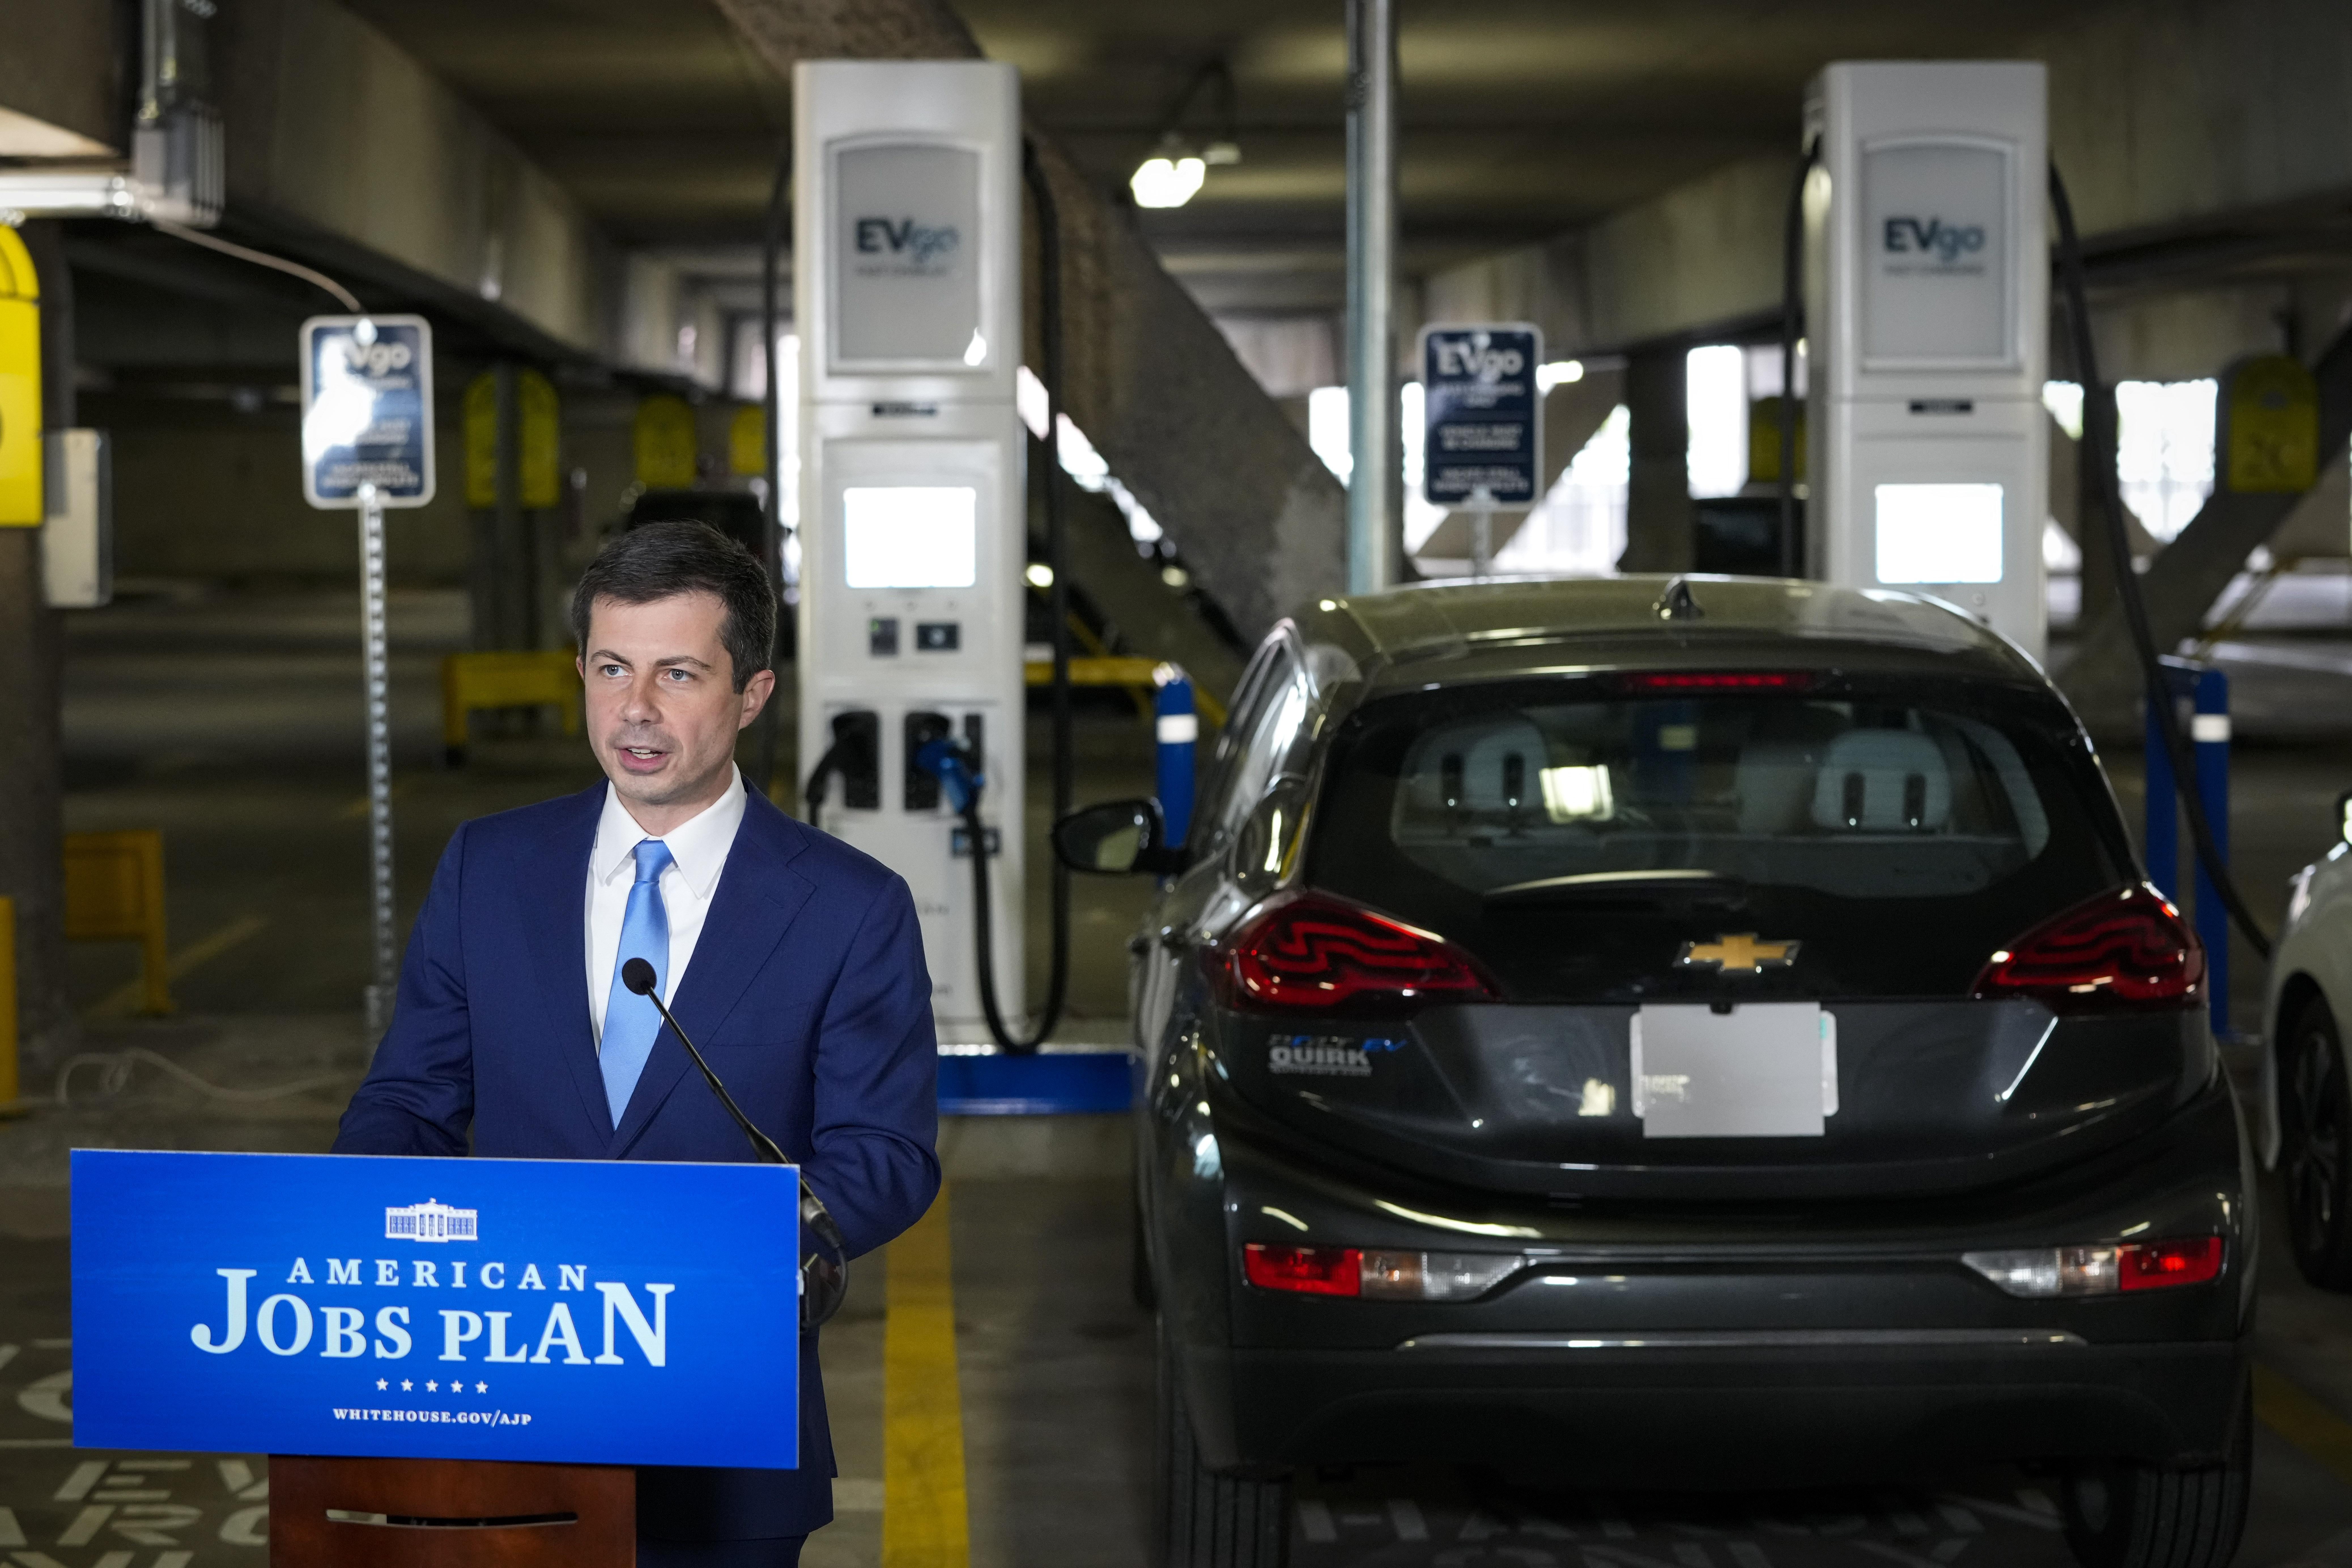 Pete Buttigieg speaks at a podium next to an electric vehicle charging station at Union Station in D.C.